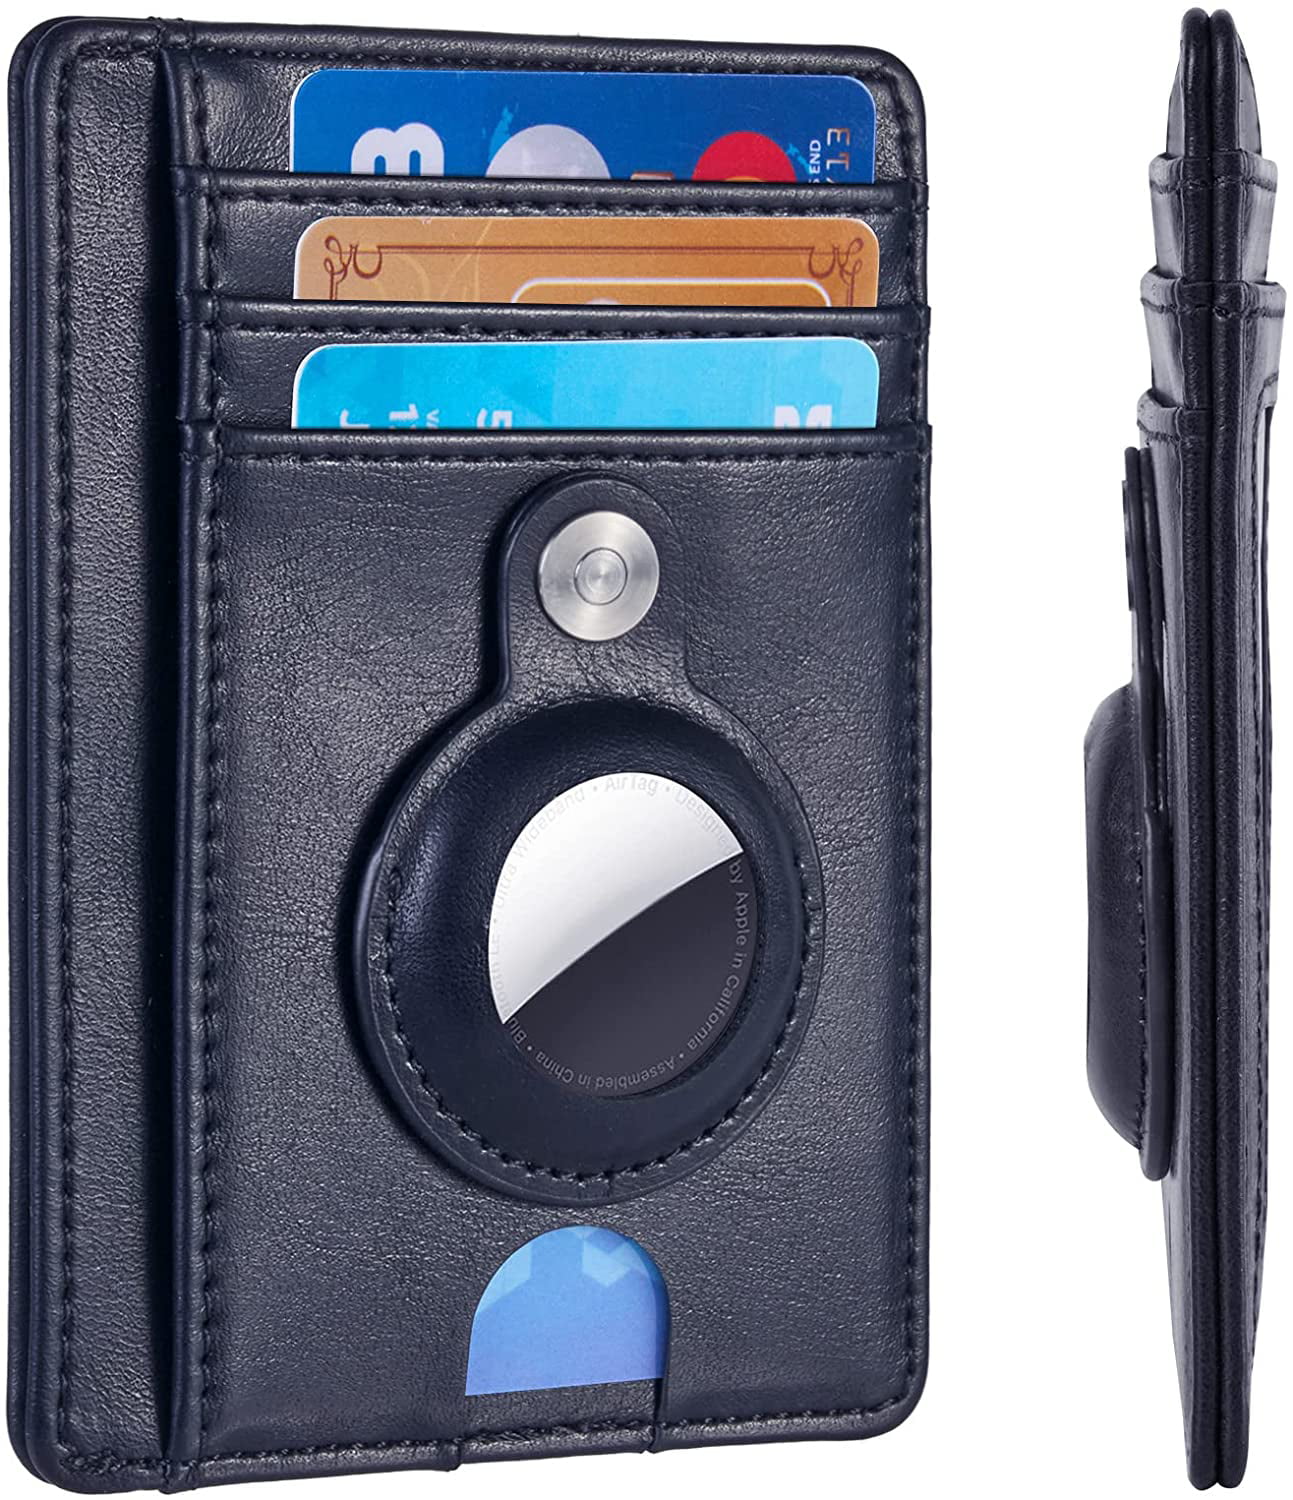 The Slide: Smart Wallet – Tags Mate